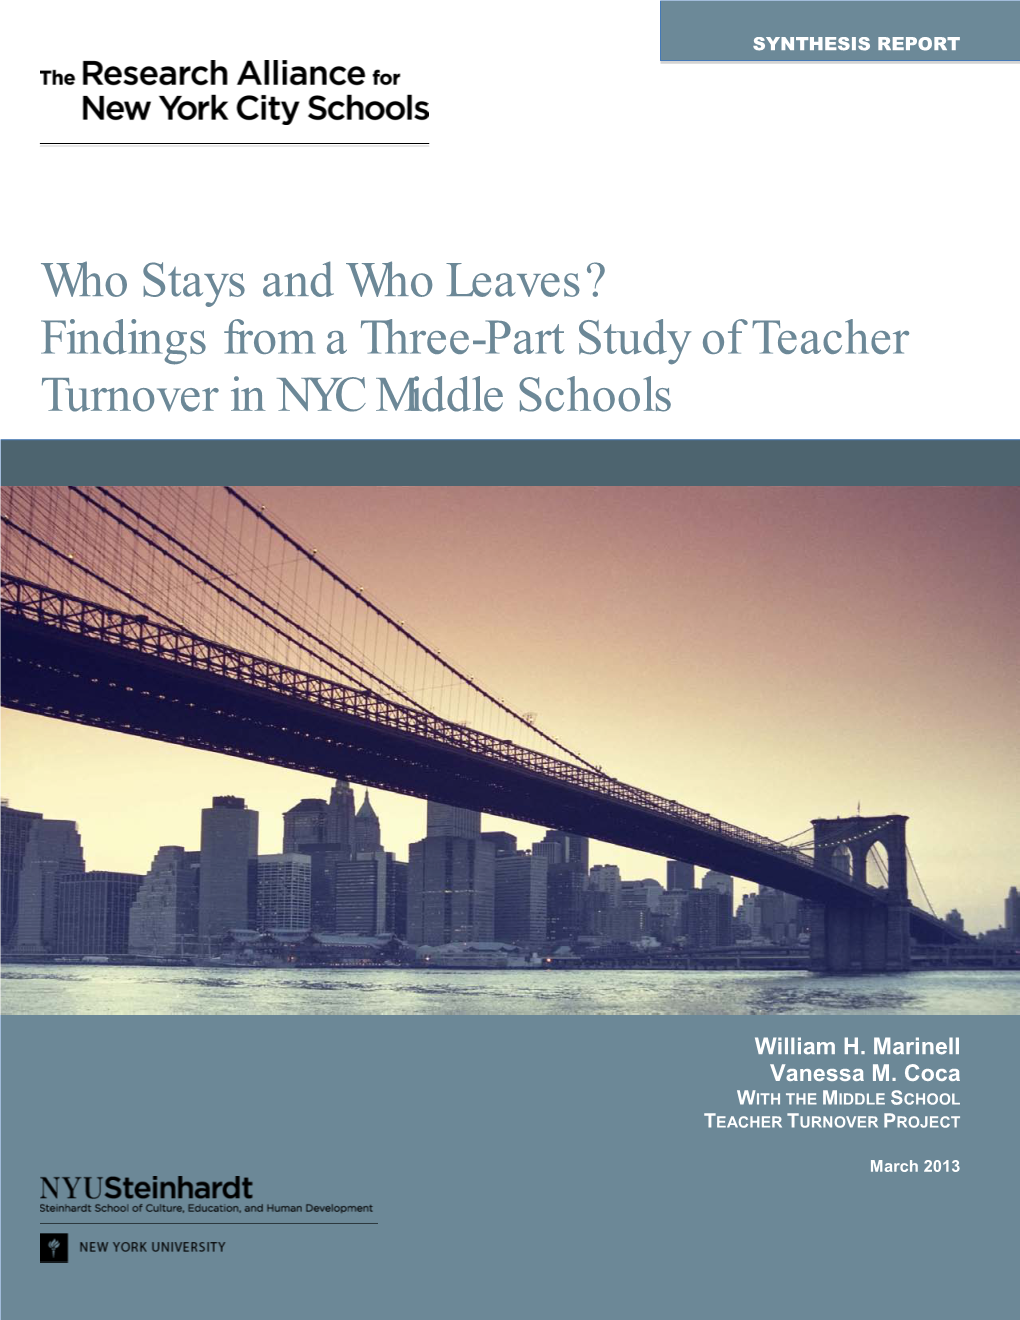 Findings from a Three-Part Study of Teacher Turnover In